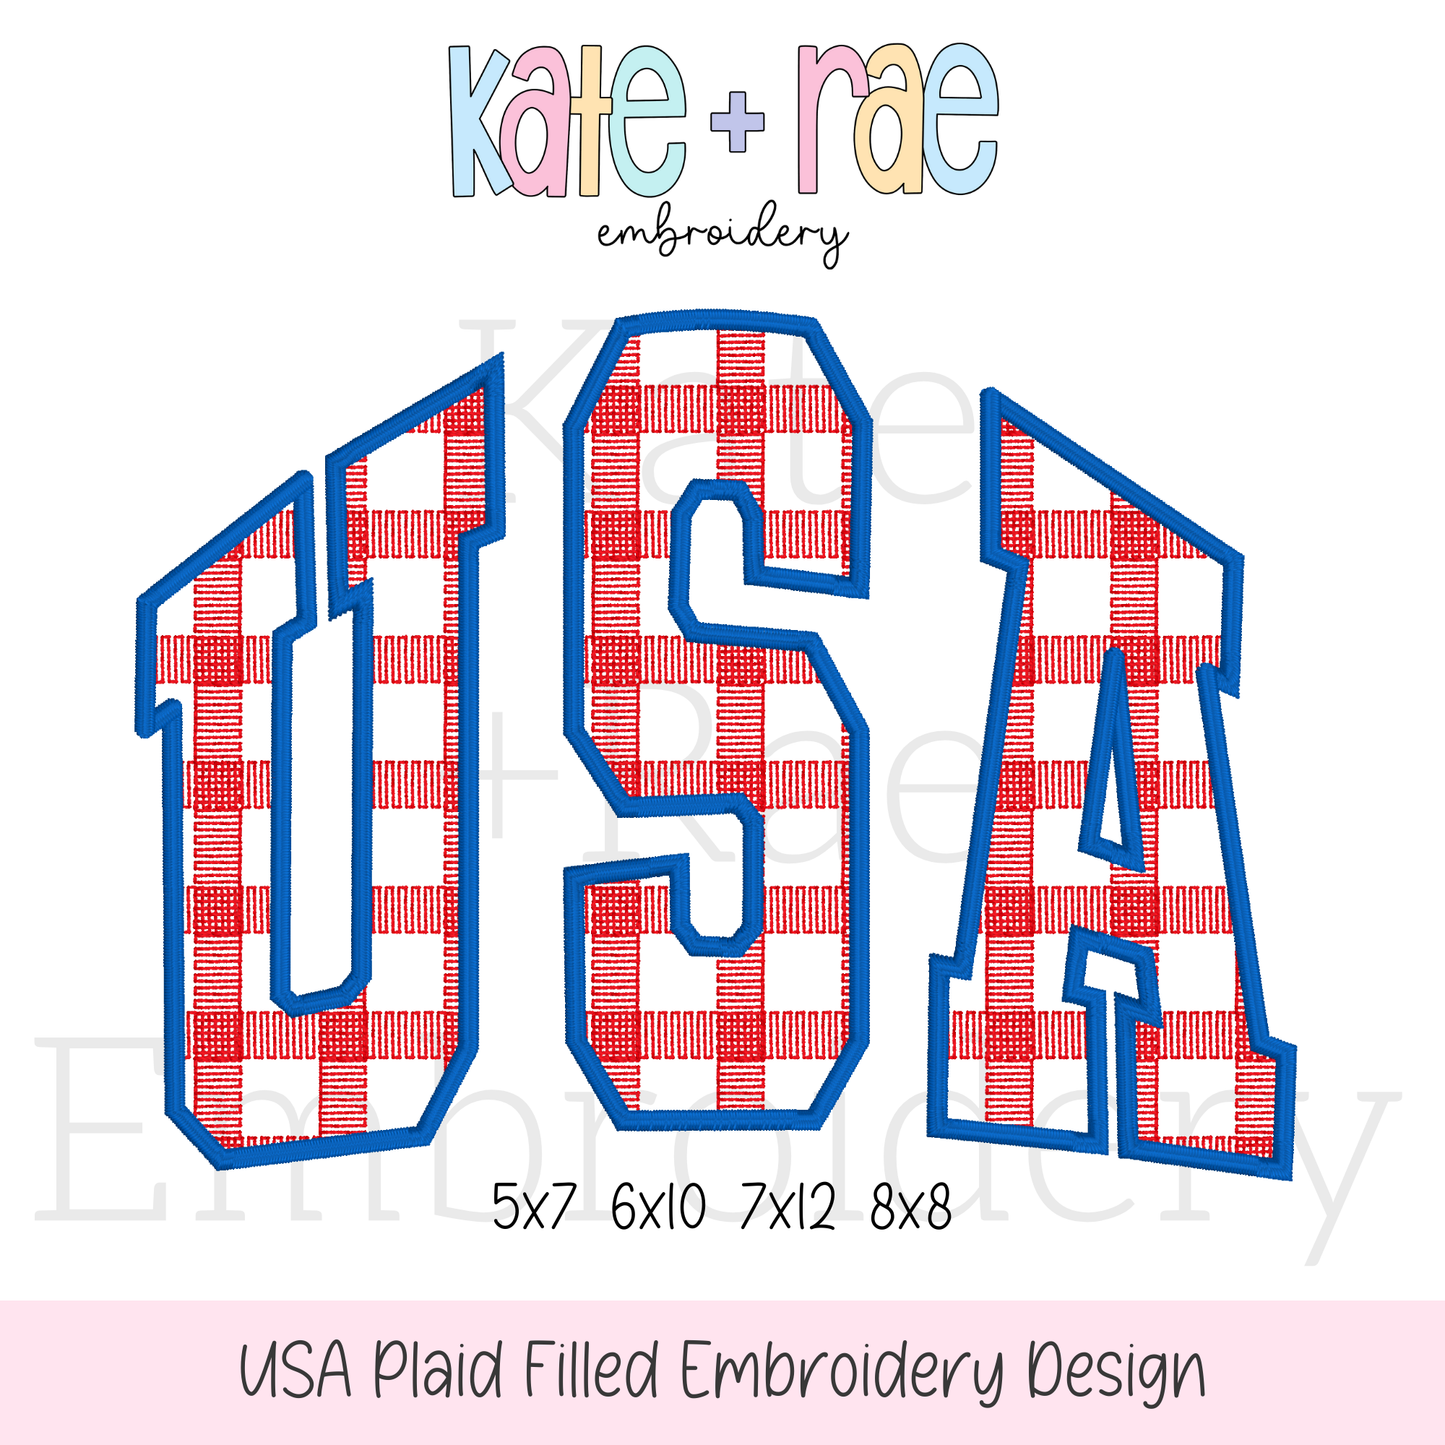 USA Plaid Filled Embroidery Design